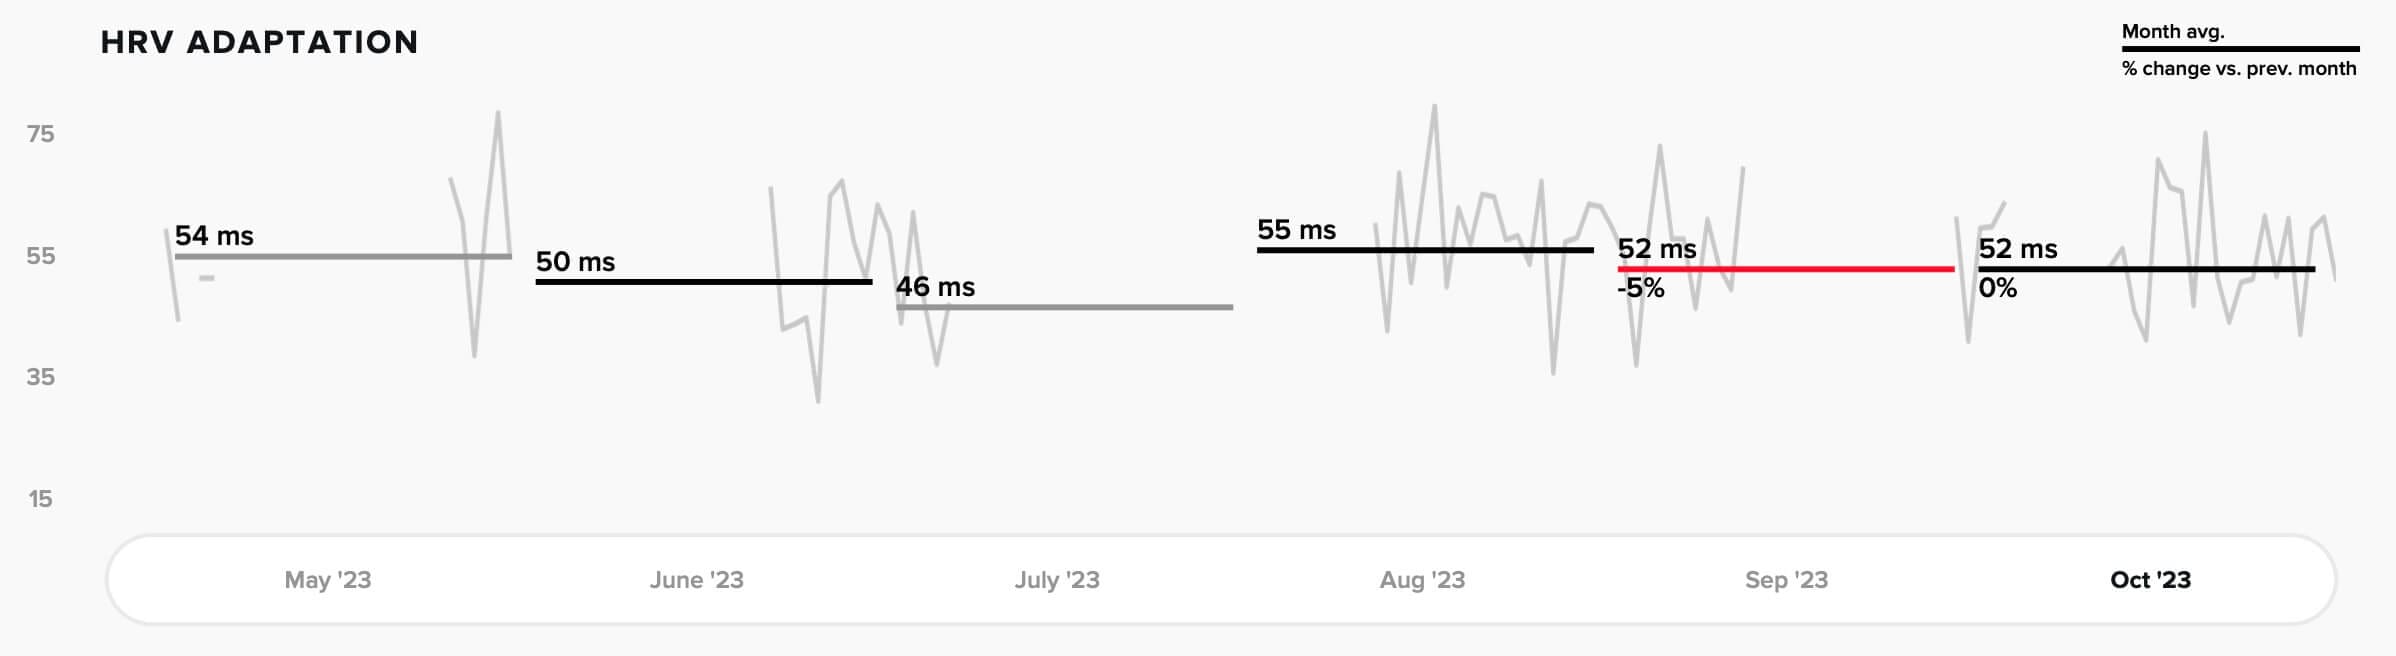 I keep tabs on how my body adapts to daily stressors (as indicated by my HRV trends).